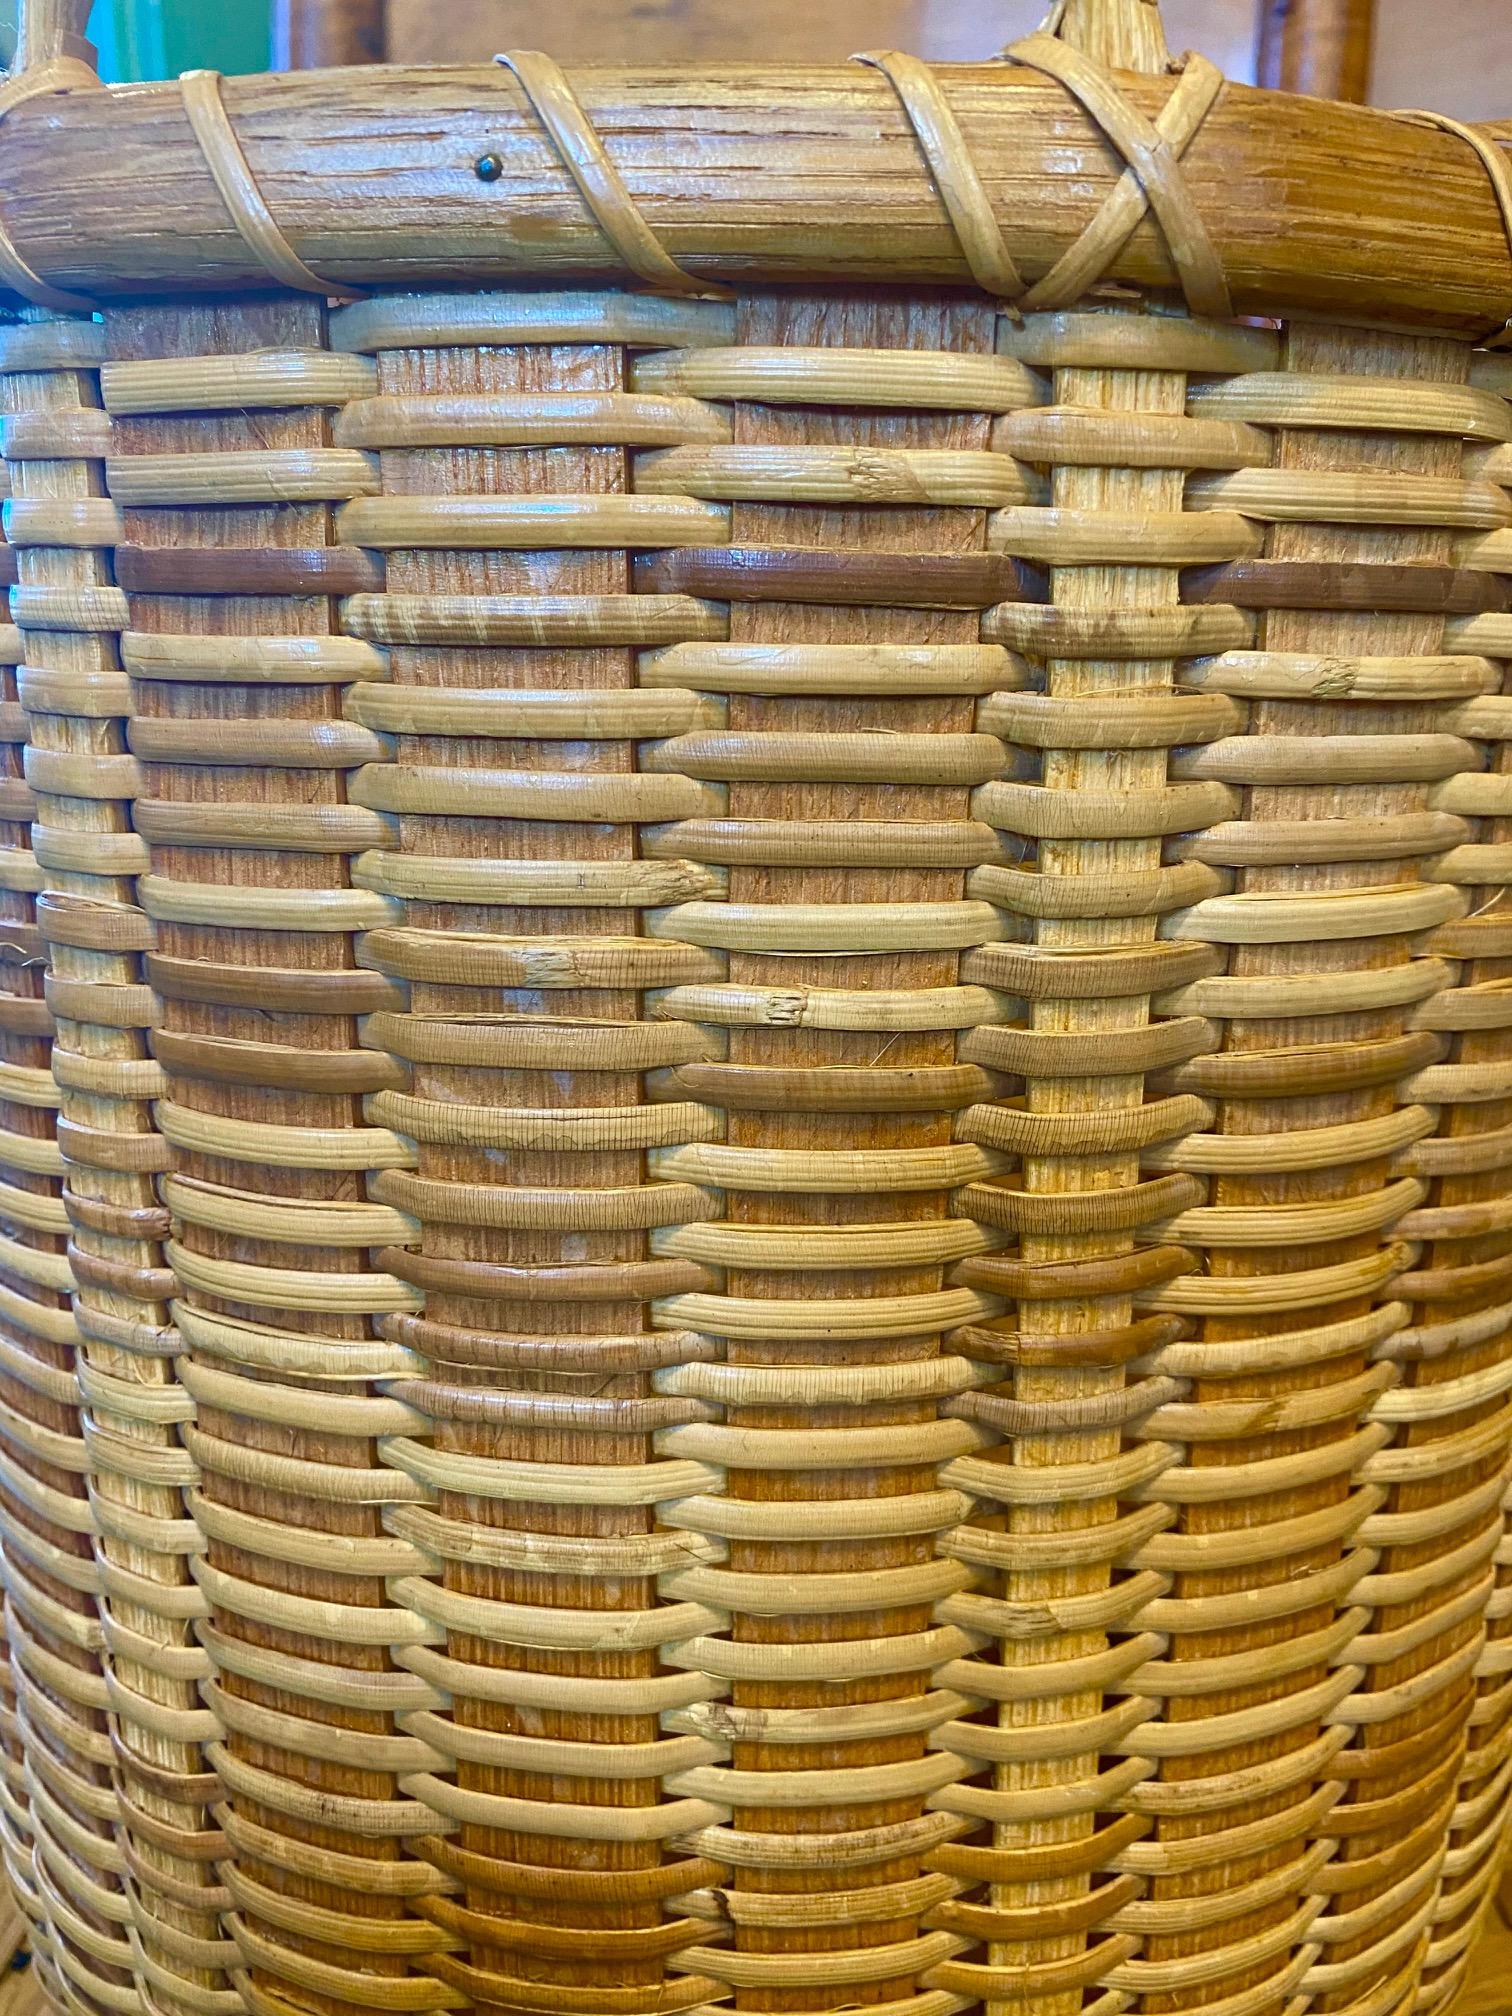 Vintage tall Nantucket round open basket by Arthur Martin, (Massachusetts: 1930 - 2000), circa 1990, featuring his characteristic wide oak staves and oak bottom. This very large basket is unusual in having the handles continued as staves all the way